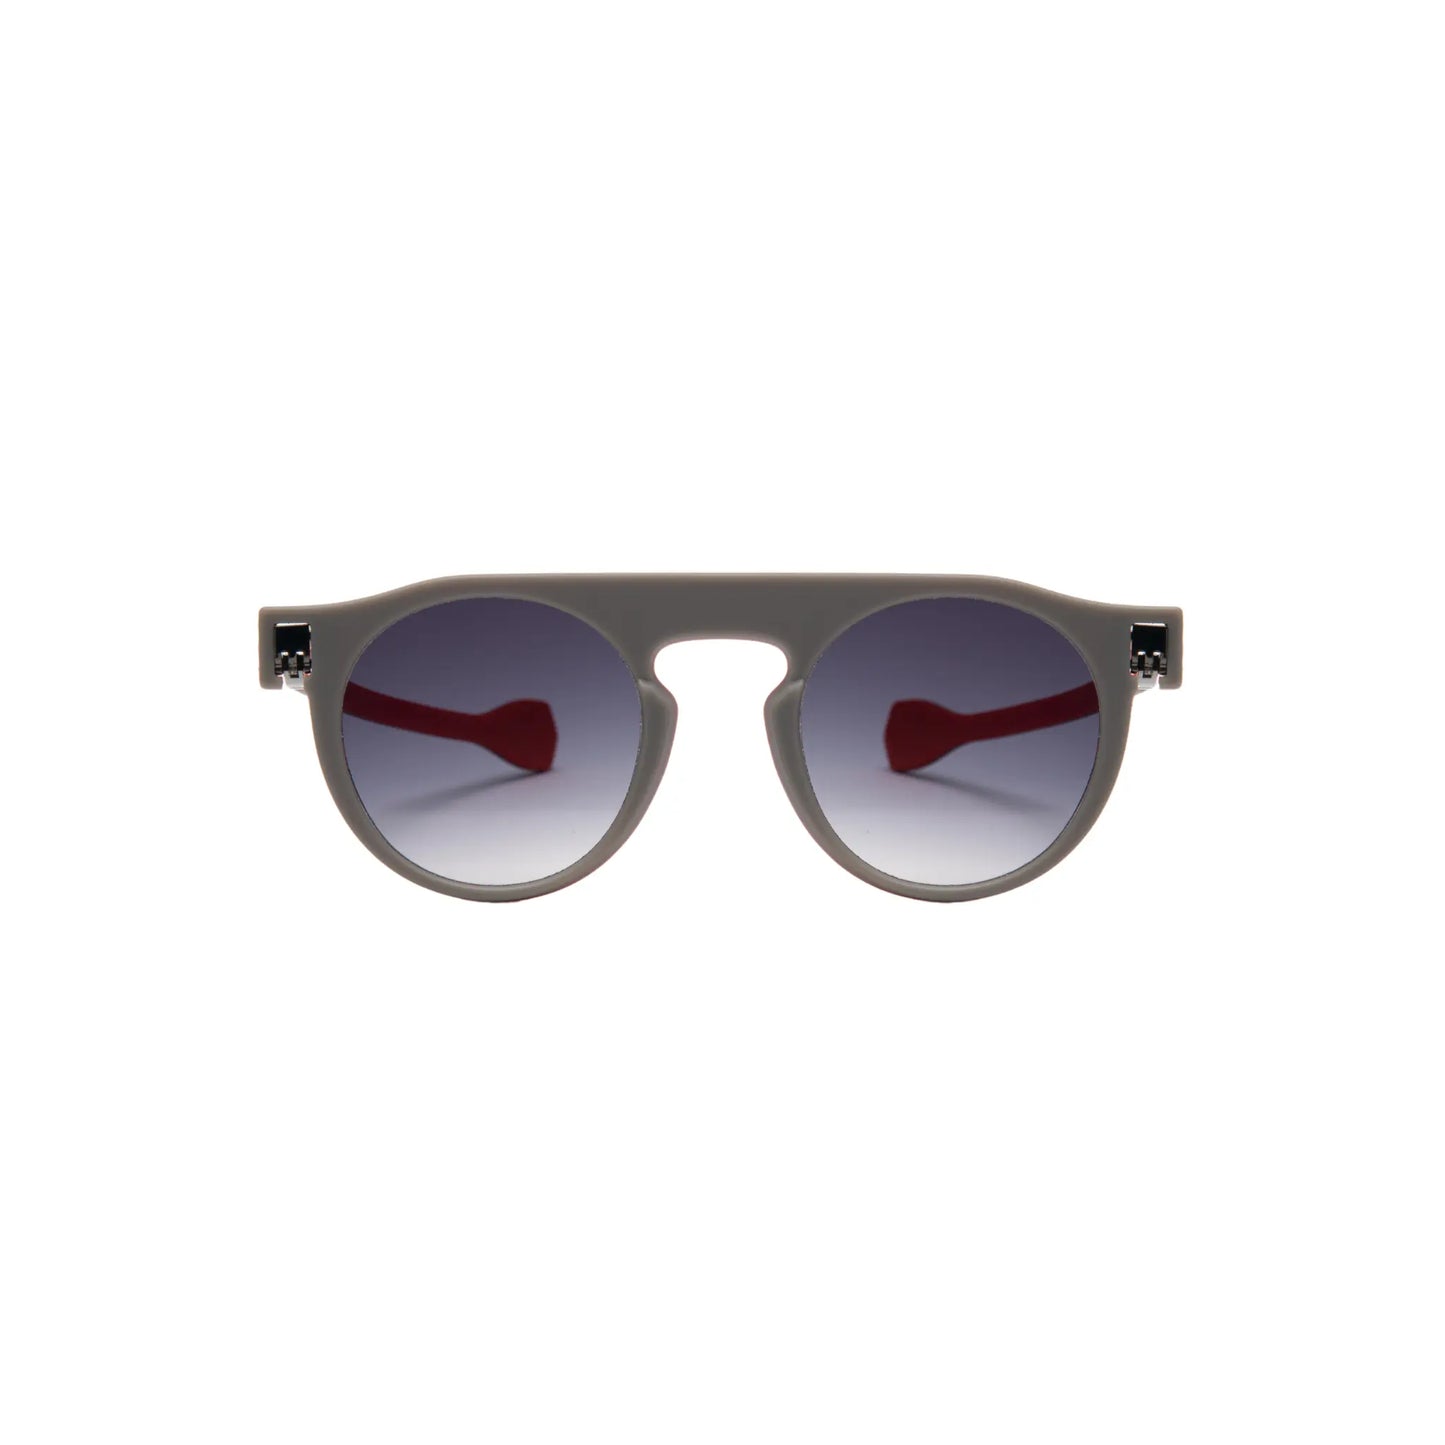 Reverso sunglasses grey & red reversible & ultra light front view 1